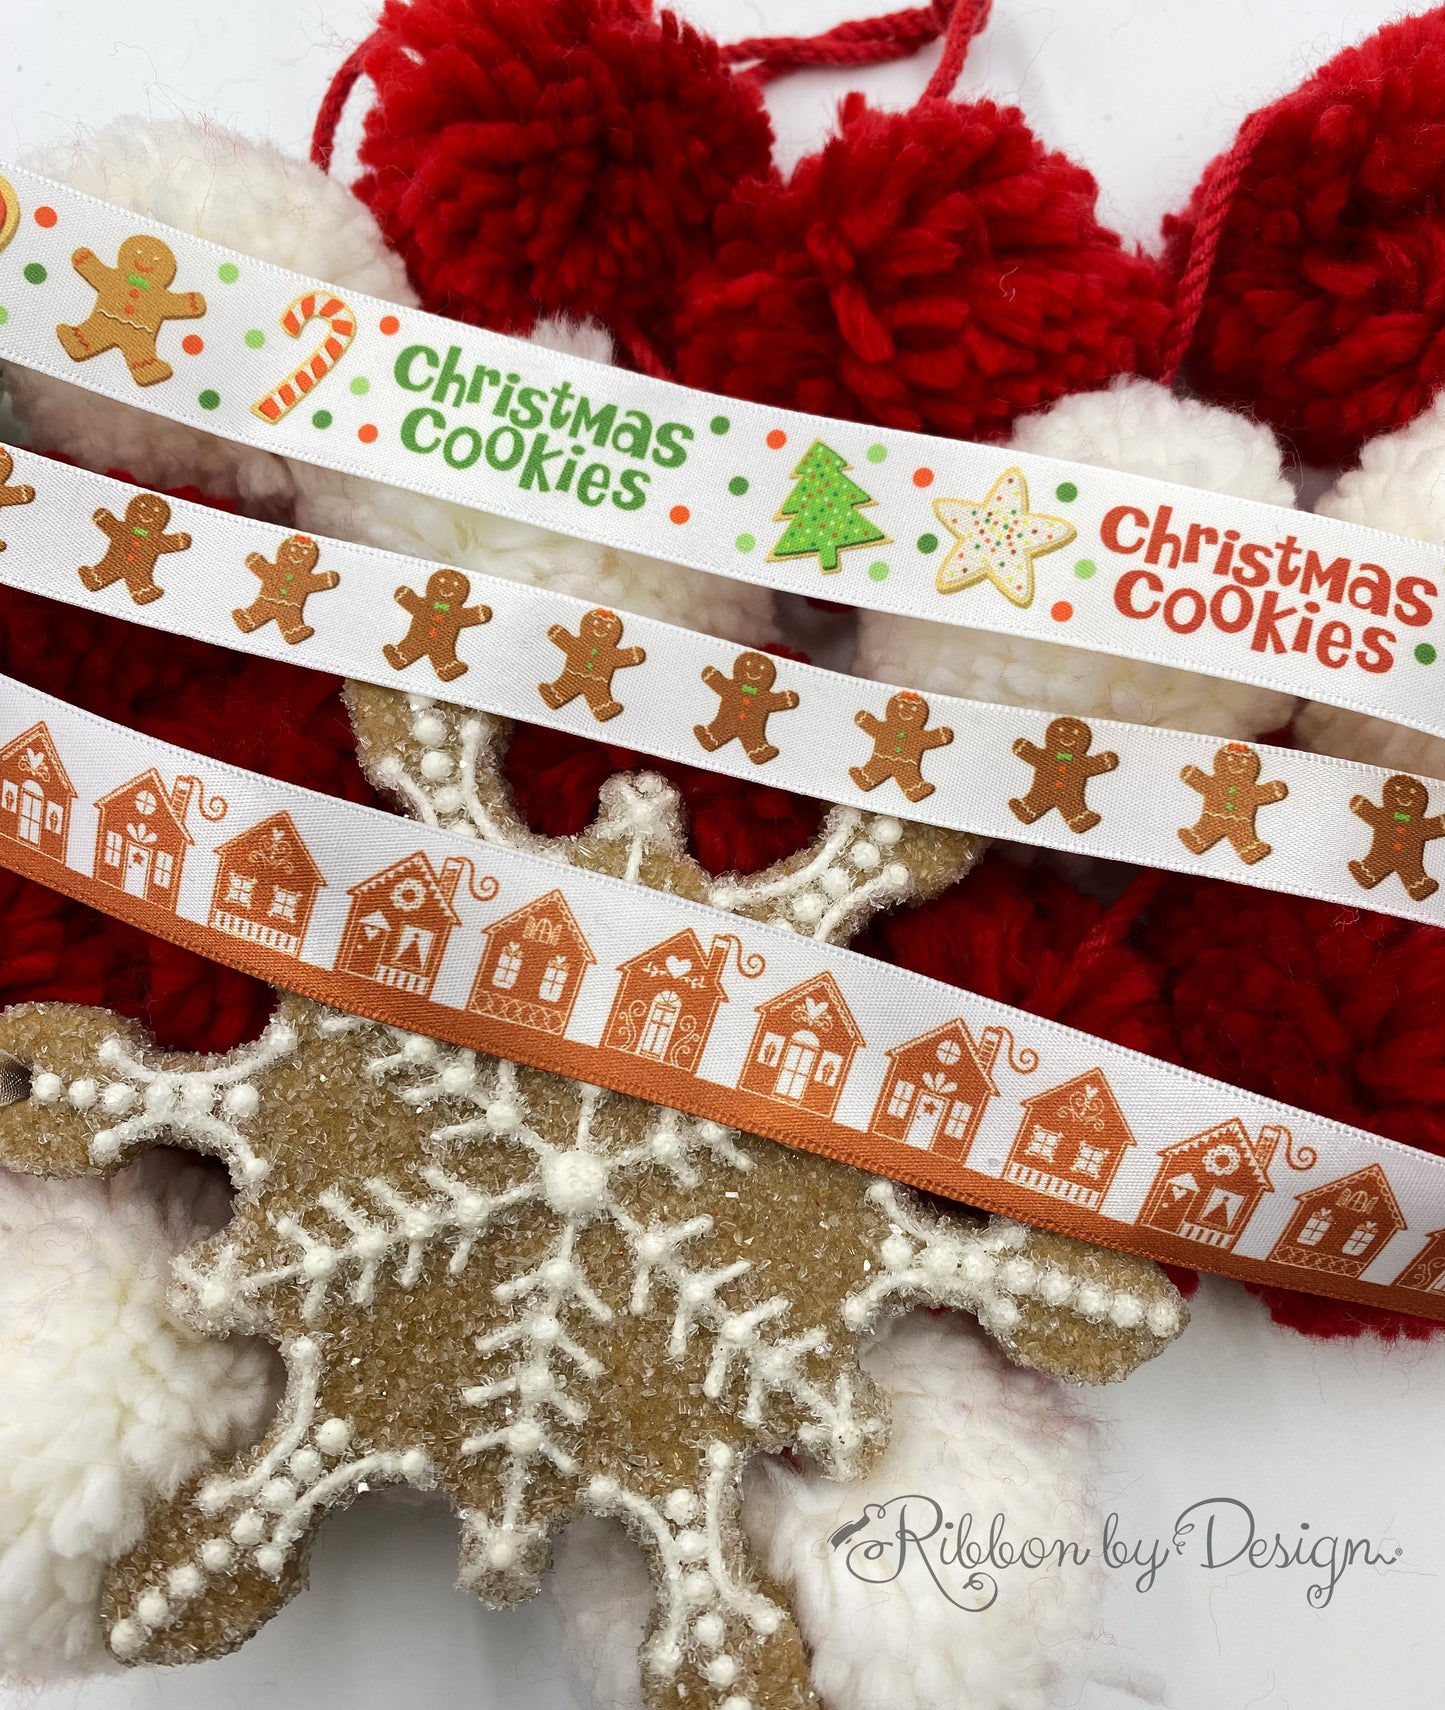 Gingerbread Men Ribbon Gingerbread cookies with green and red bows printed on 5/8" white satin and grosgrain